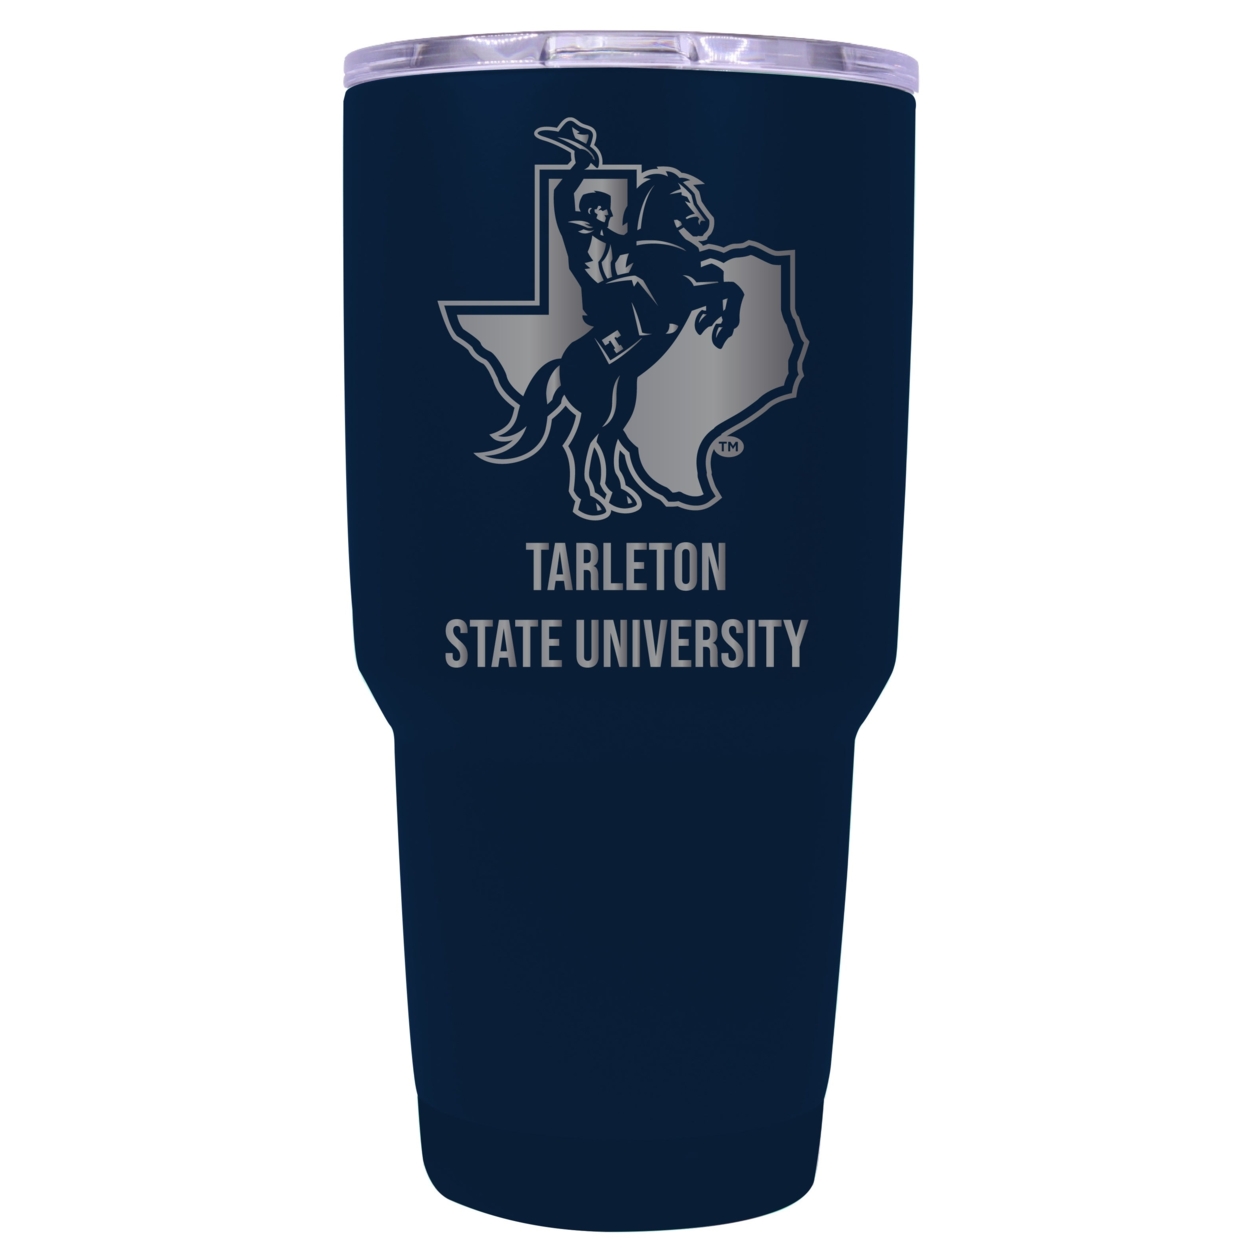 Tarleton State University 24 Oz Laser Engraved Stainless Steel Insulated Tumbler - Choose Your Color. - Navy